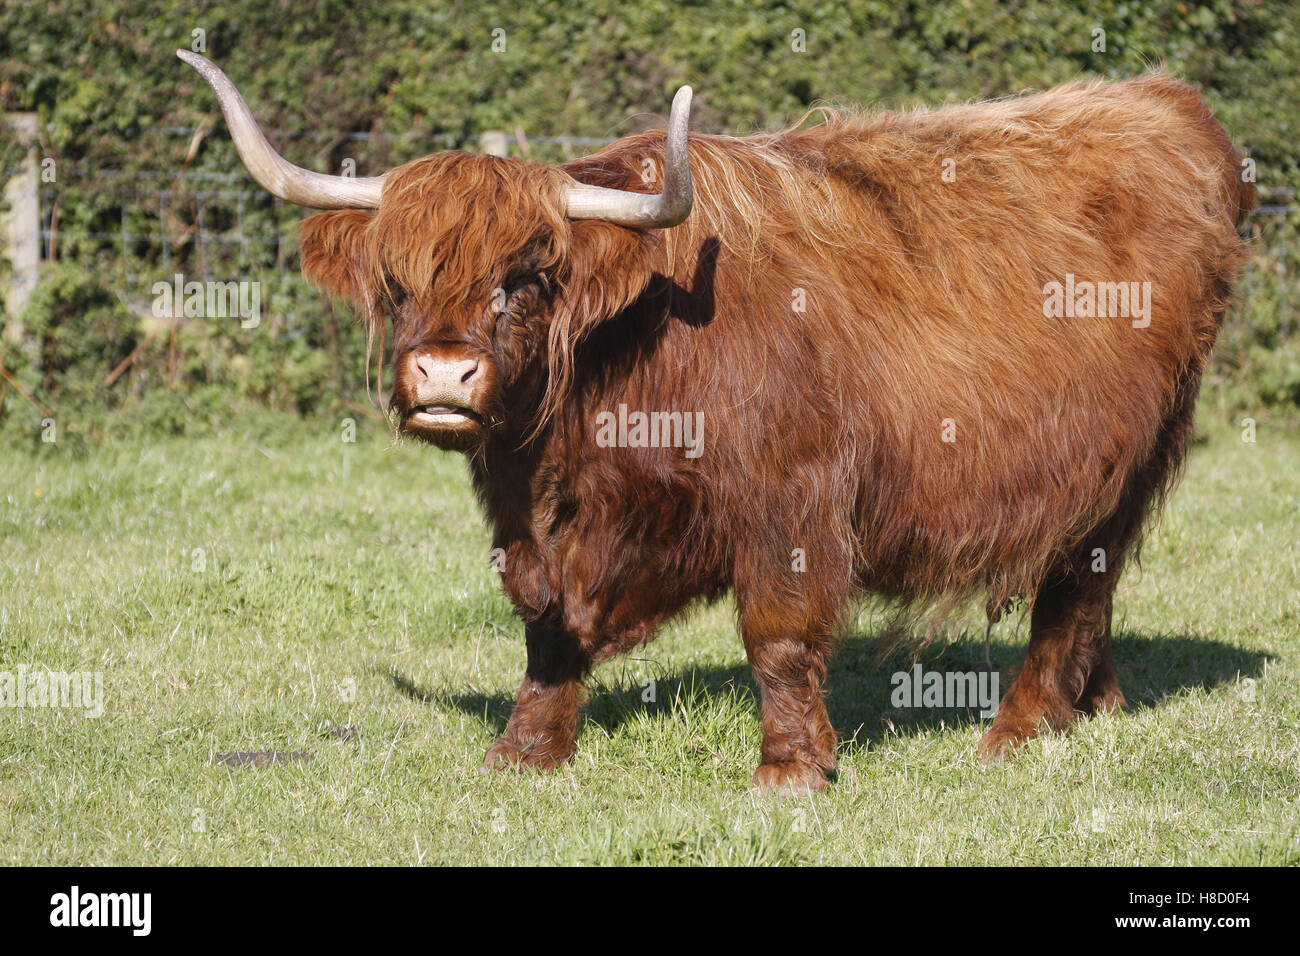 Full Size Shetland Aberdeen Angus cattle in field Banque D'Images